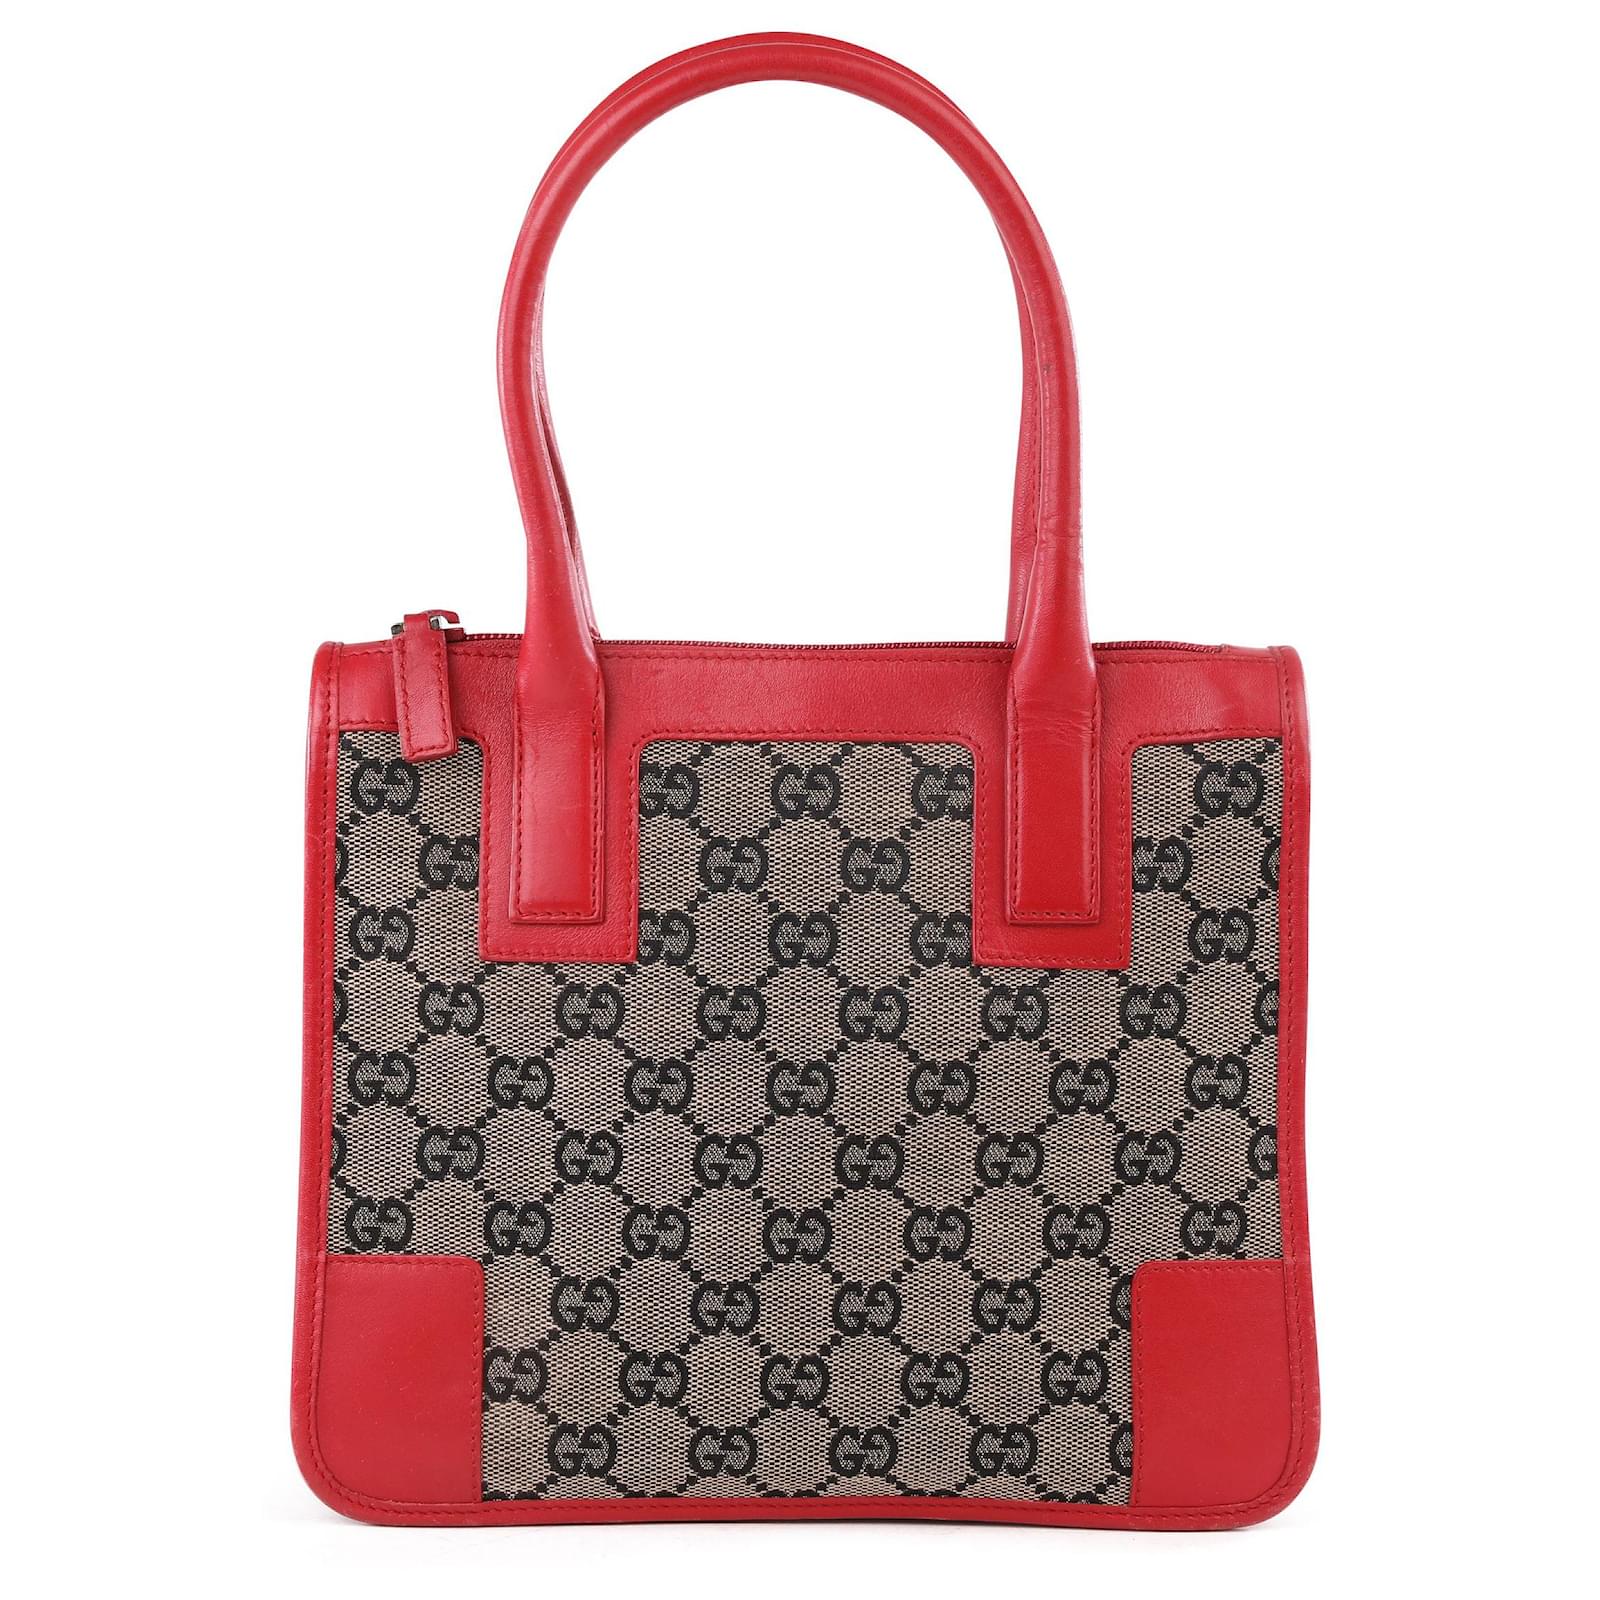 Gucci Beige/Red Canvas/Leather 100 Centennial Music Small Tote Bag